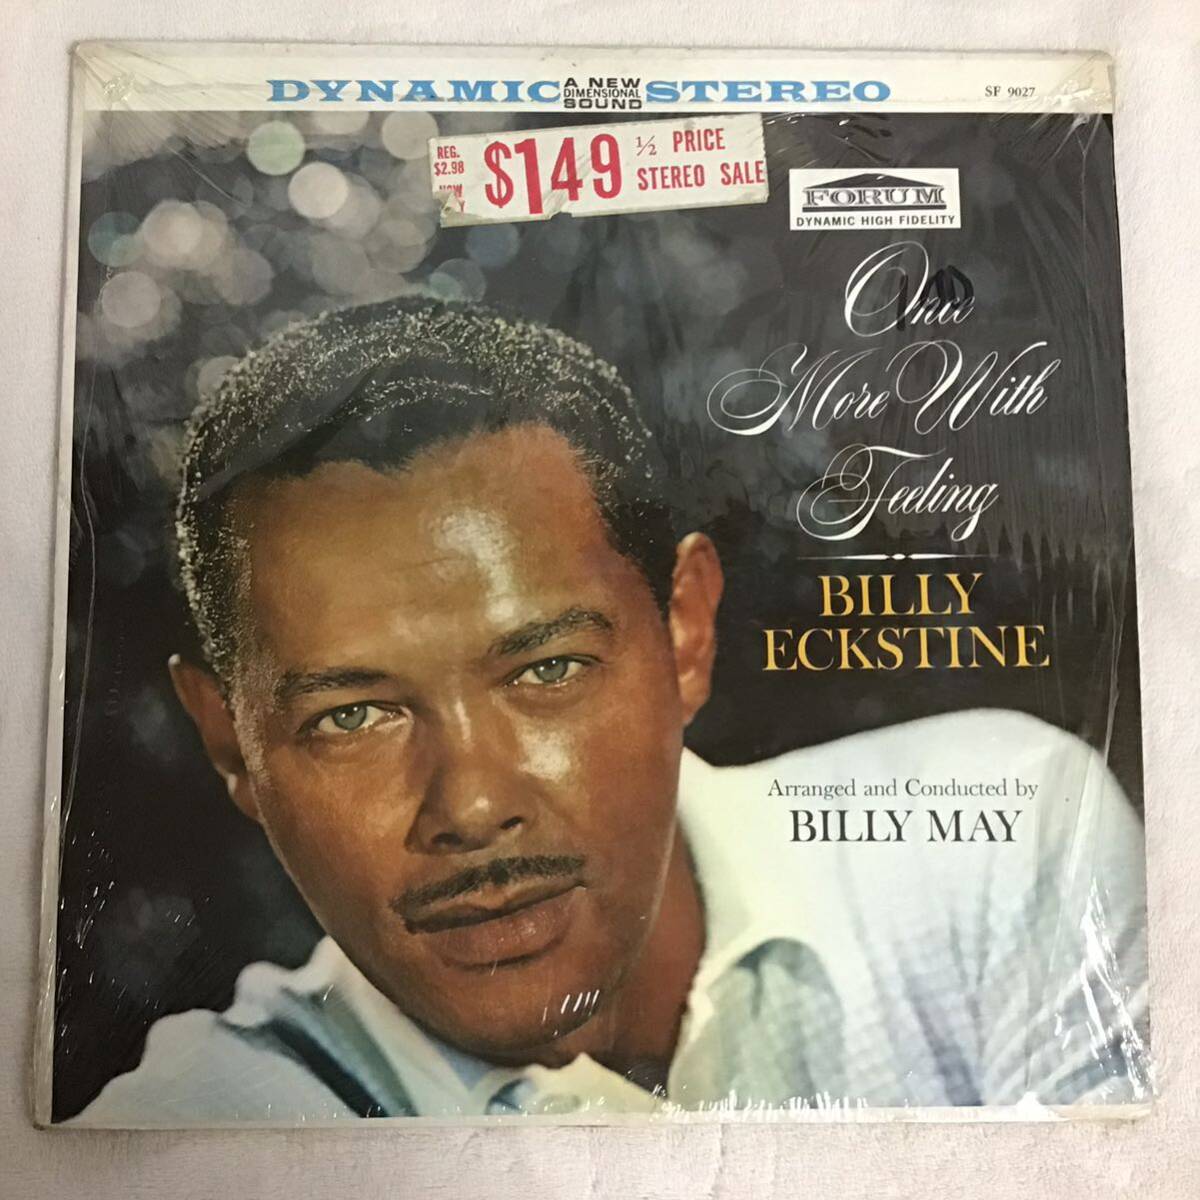 US盤 シュリンク LP / Billy Eckstine / Once More With Feeling SF-9027_画像1